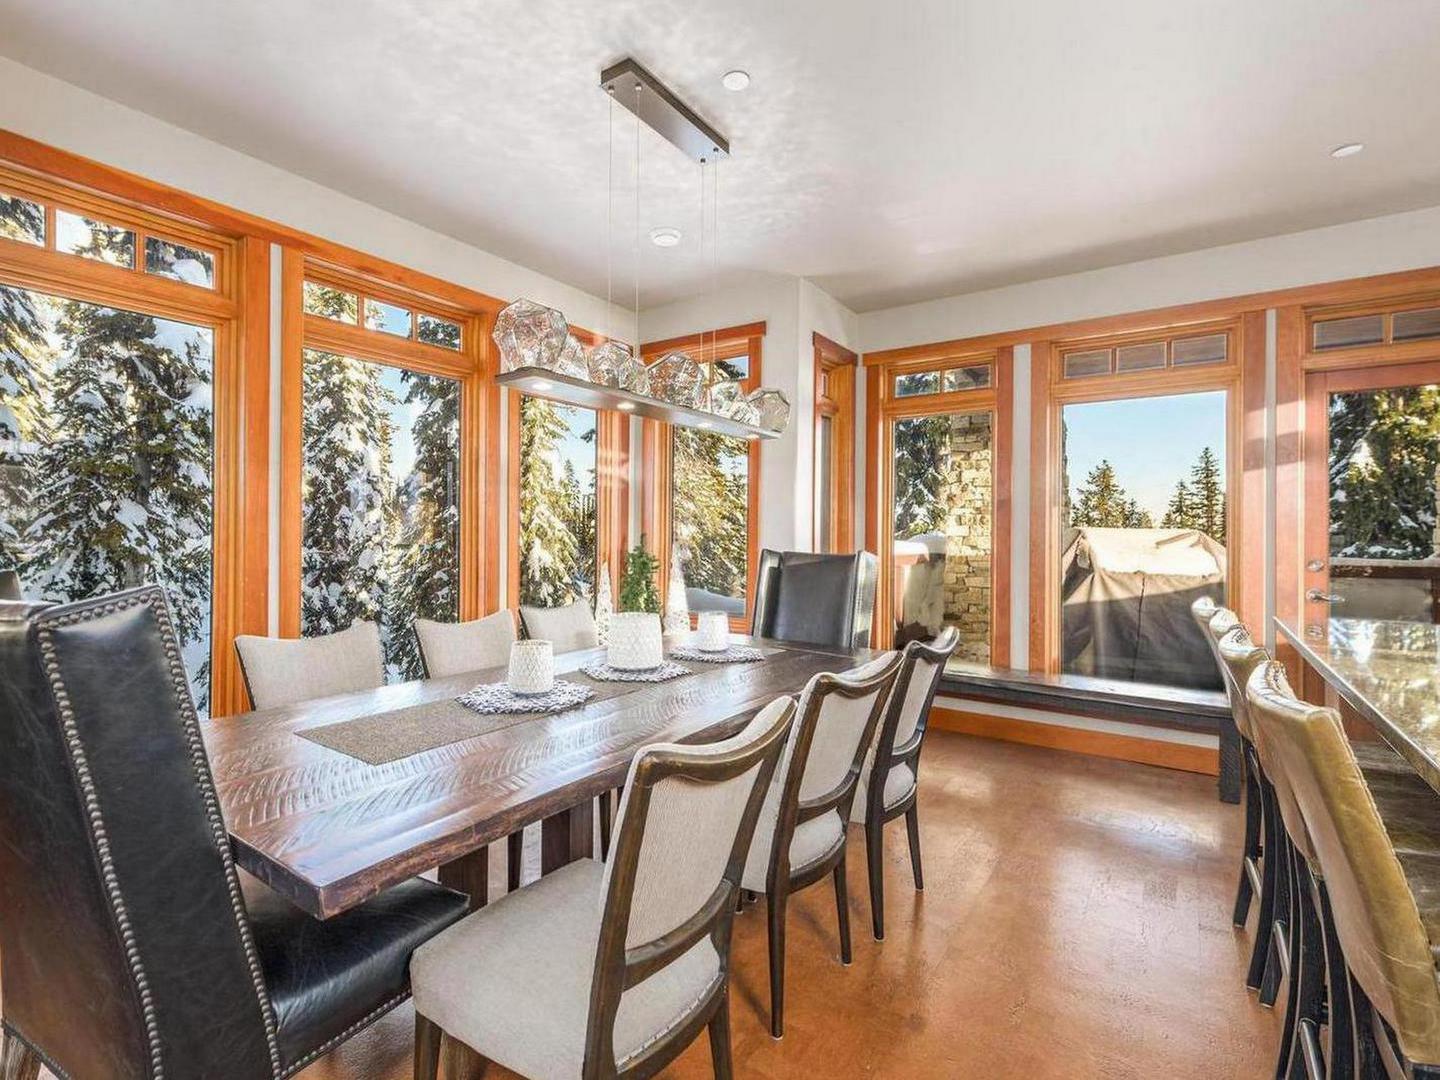 Magnificent Moonshine's luxury dining room with a large table, panoramic windows and hardwood floors, managed by Luxury Mountain Vacation Rentals at Big White Ski Resort.